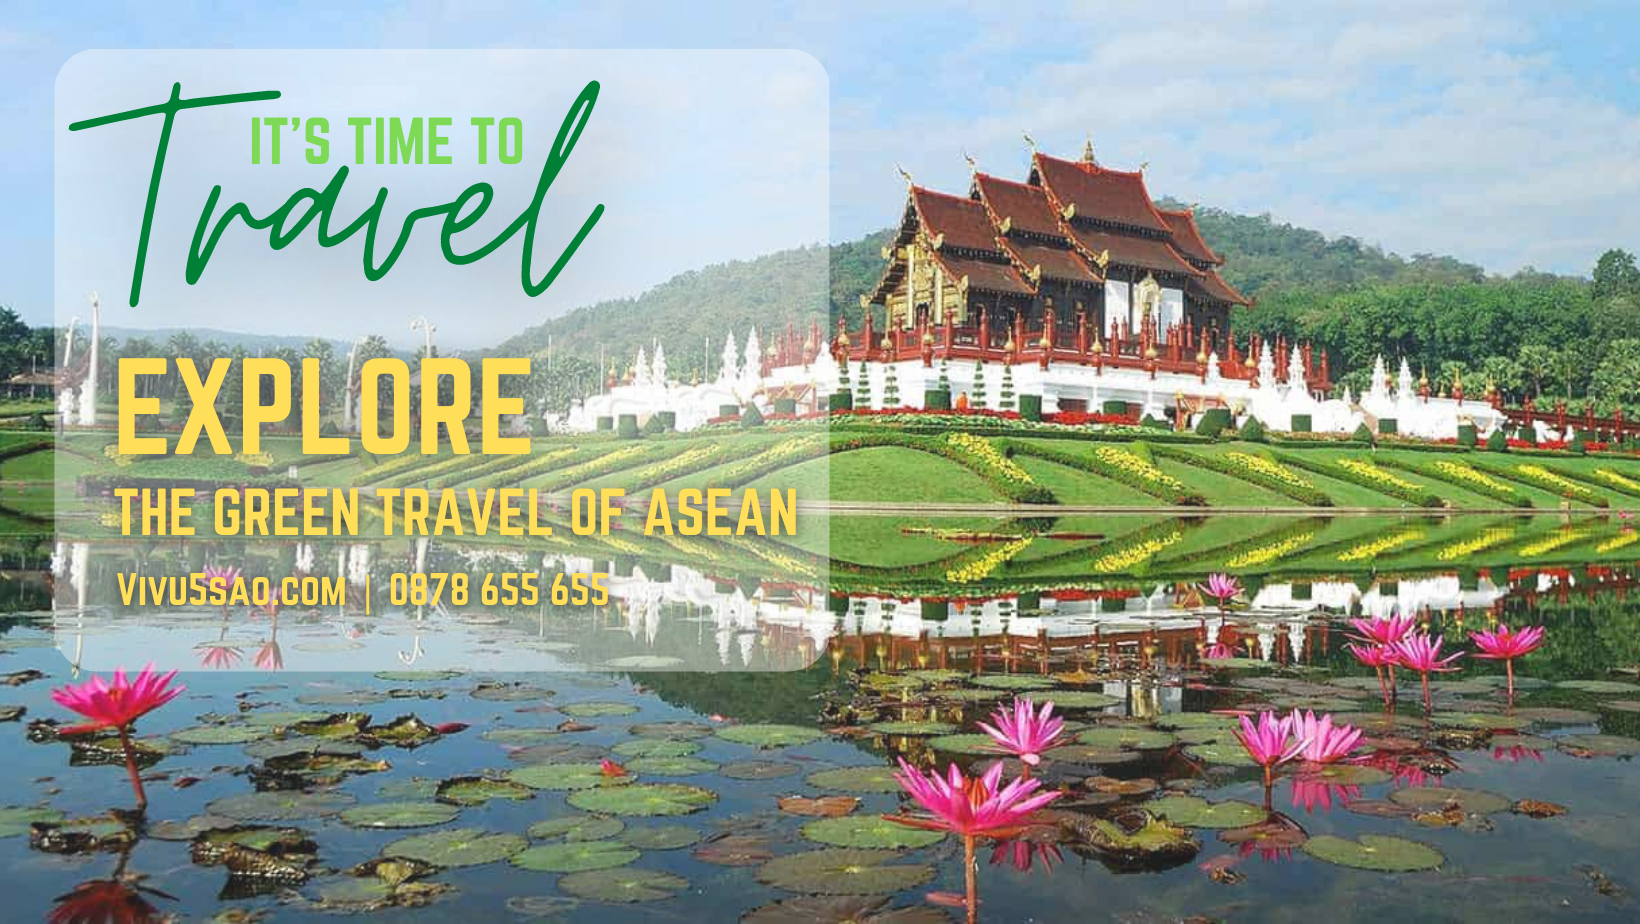 the Green Travel of ASEAN